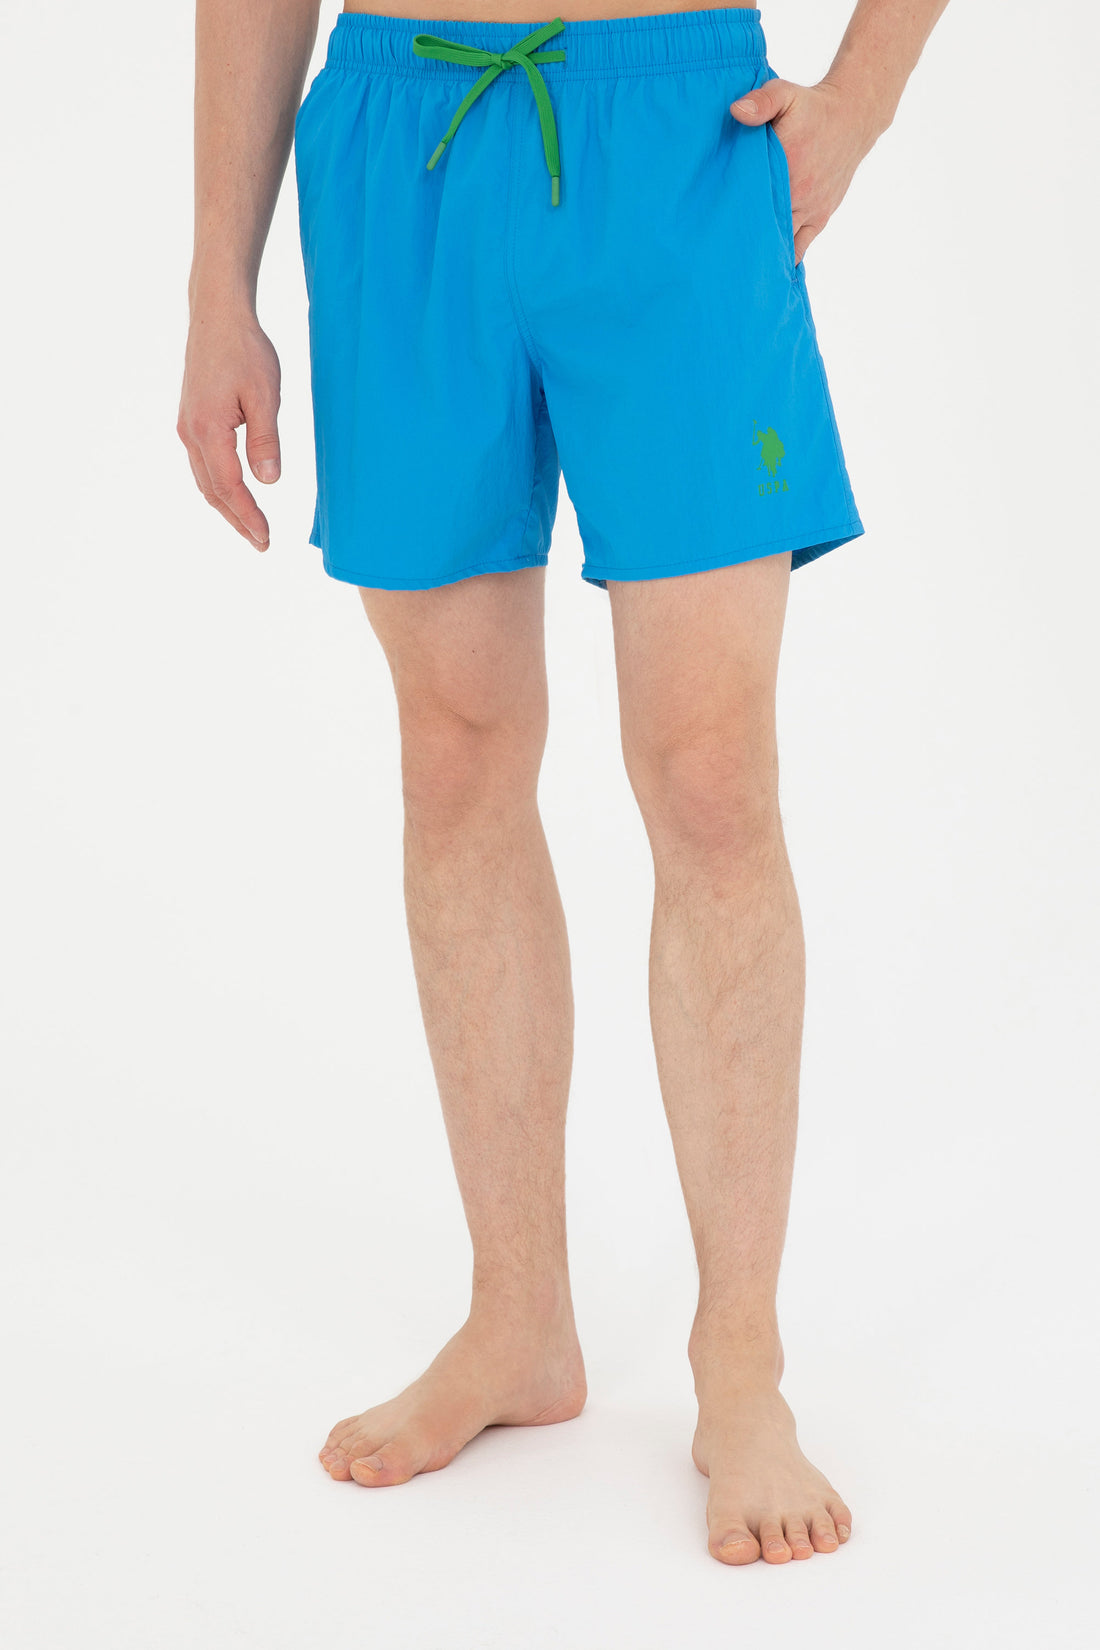 Swimming Trunks With Drawstrings_G081SZ0660 1832992_VR045_02